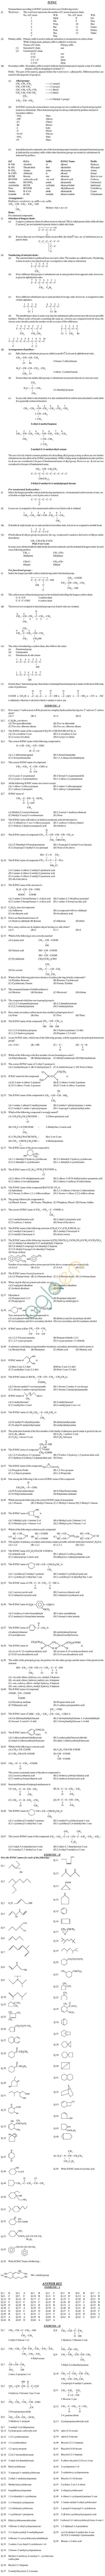 Chemistry Study Material - Chapter 17